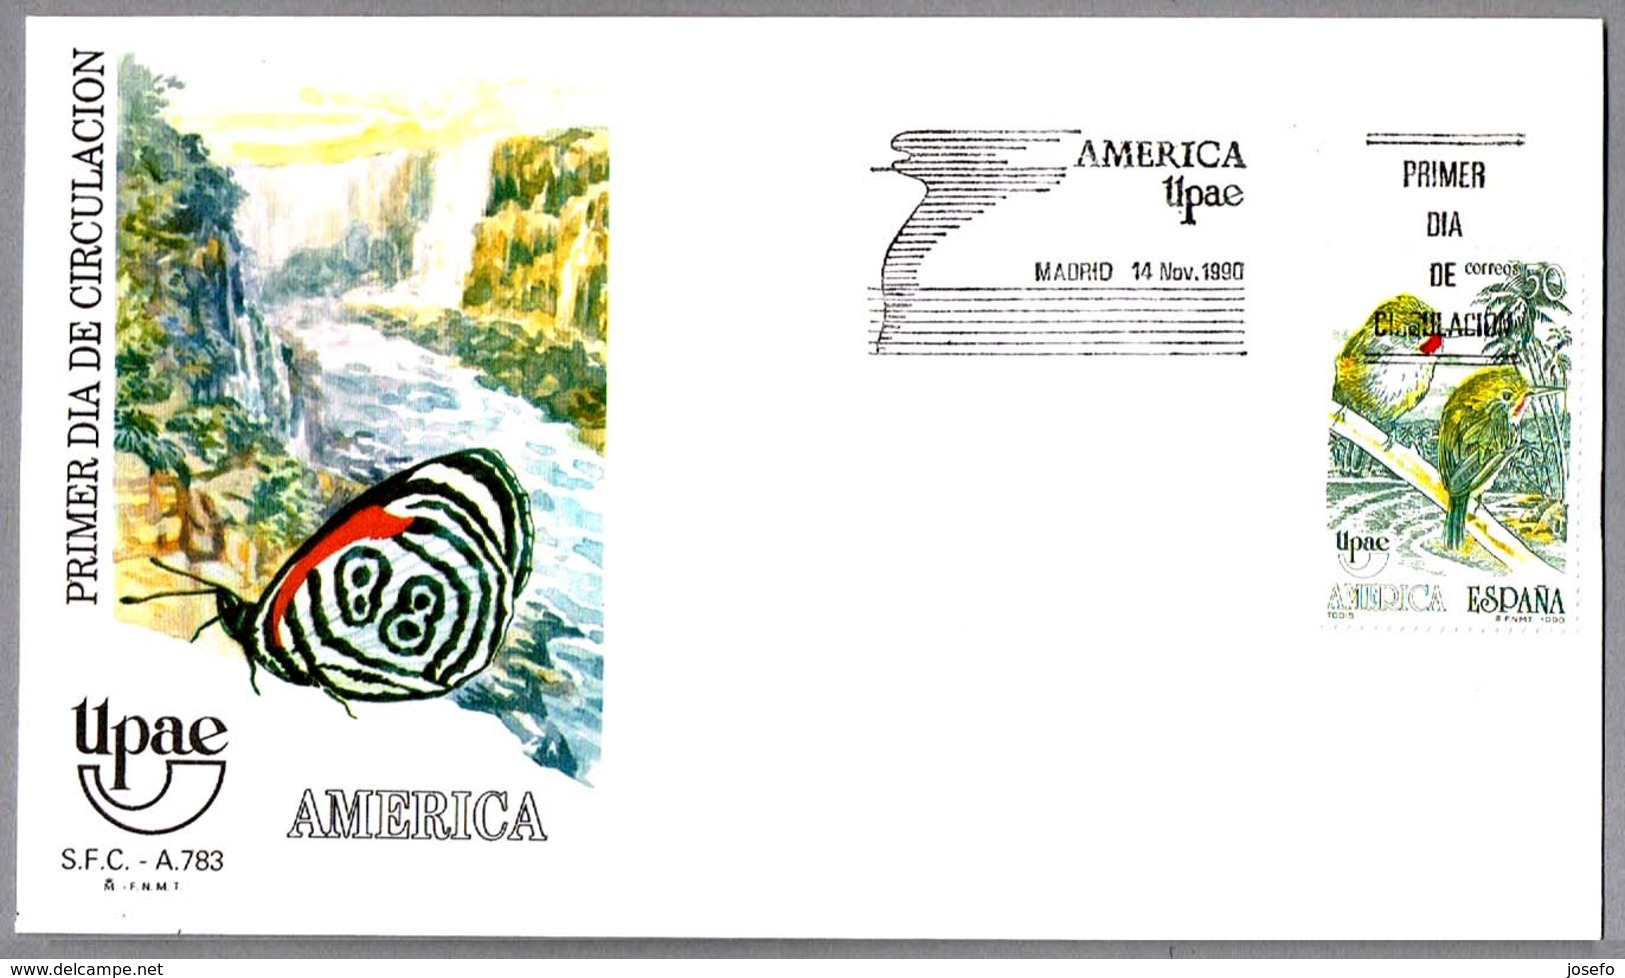 America UPAE - AVE TODIS - TODUS. FDC Madrid 1990 - Oblitérations & Flammes